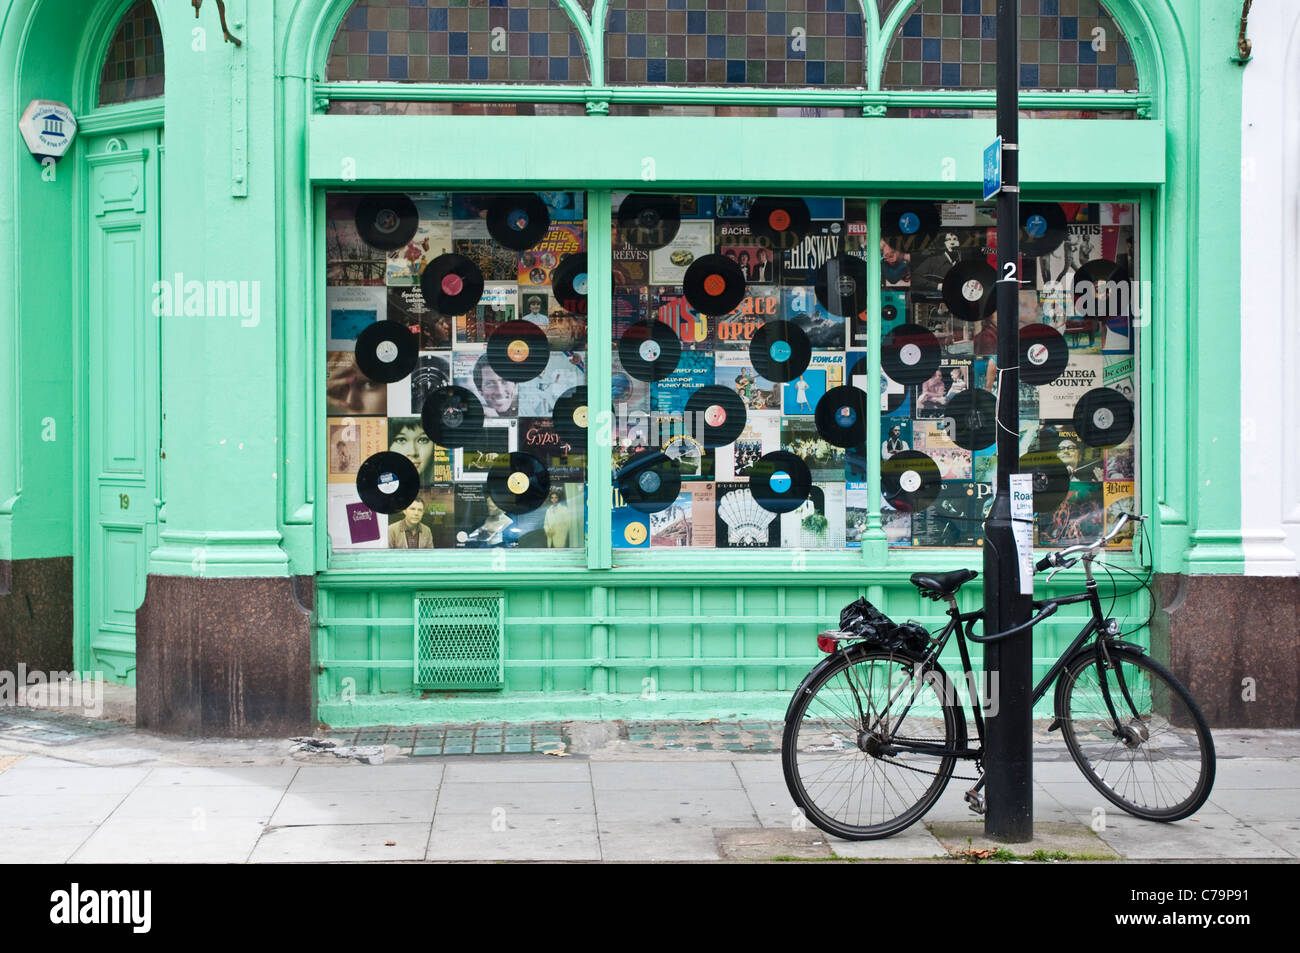 Vinyl records shop and bicycle, Bloomsbury, London, UK Stock Photo